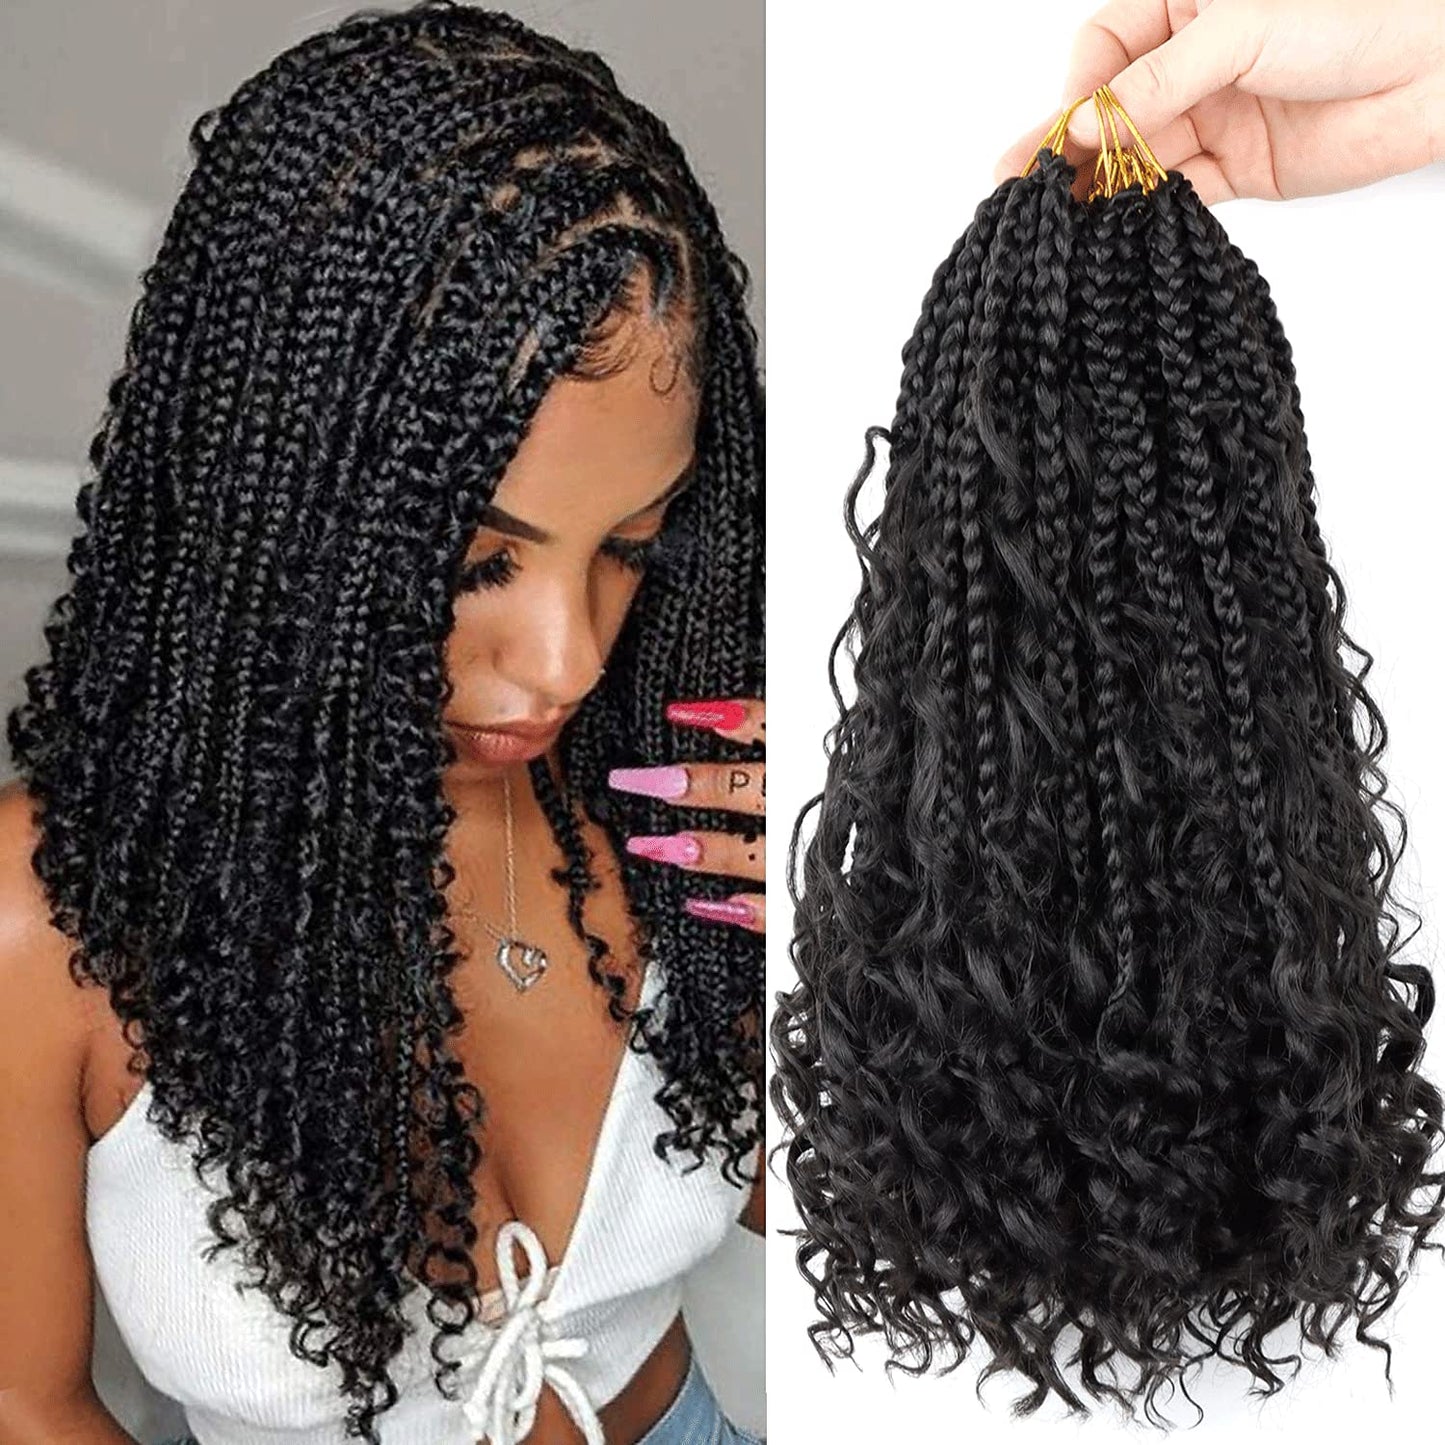 7 Packs Crochet Box Braids Curly Ends 10 Inch Finland